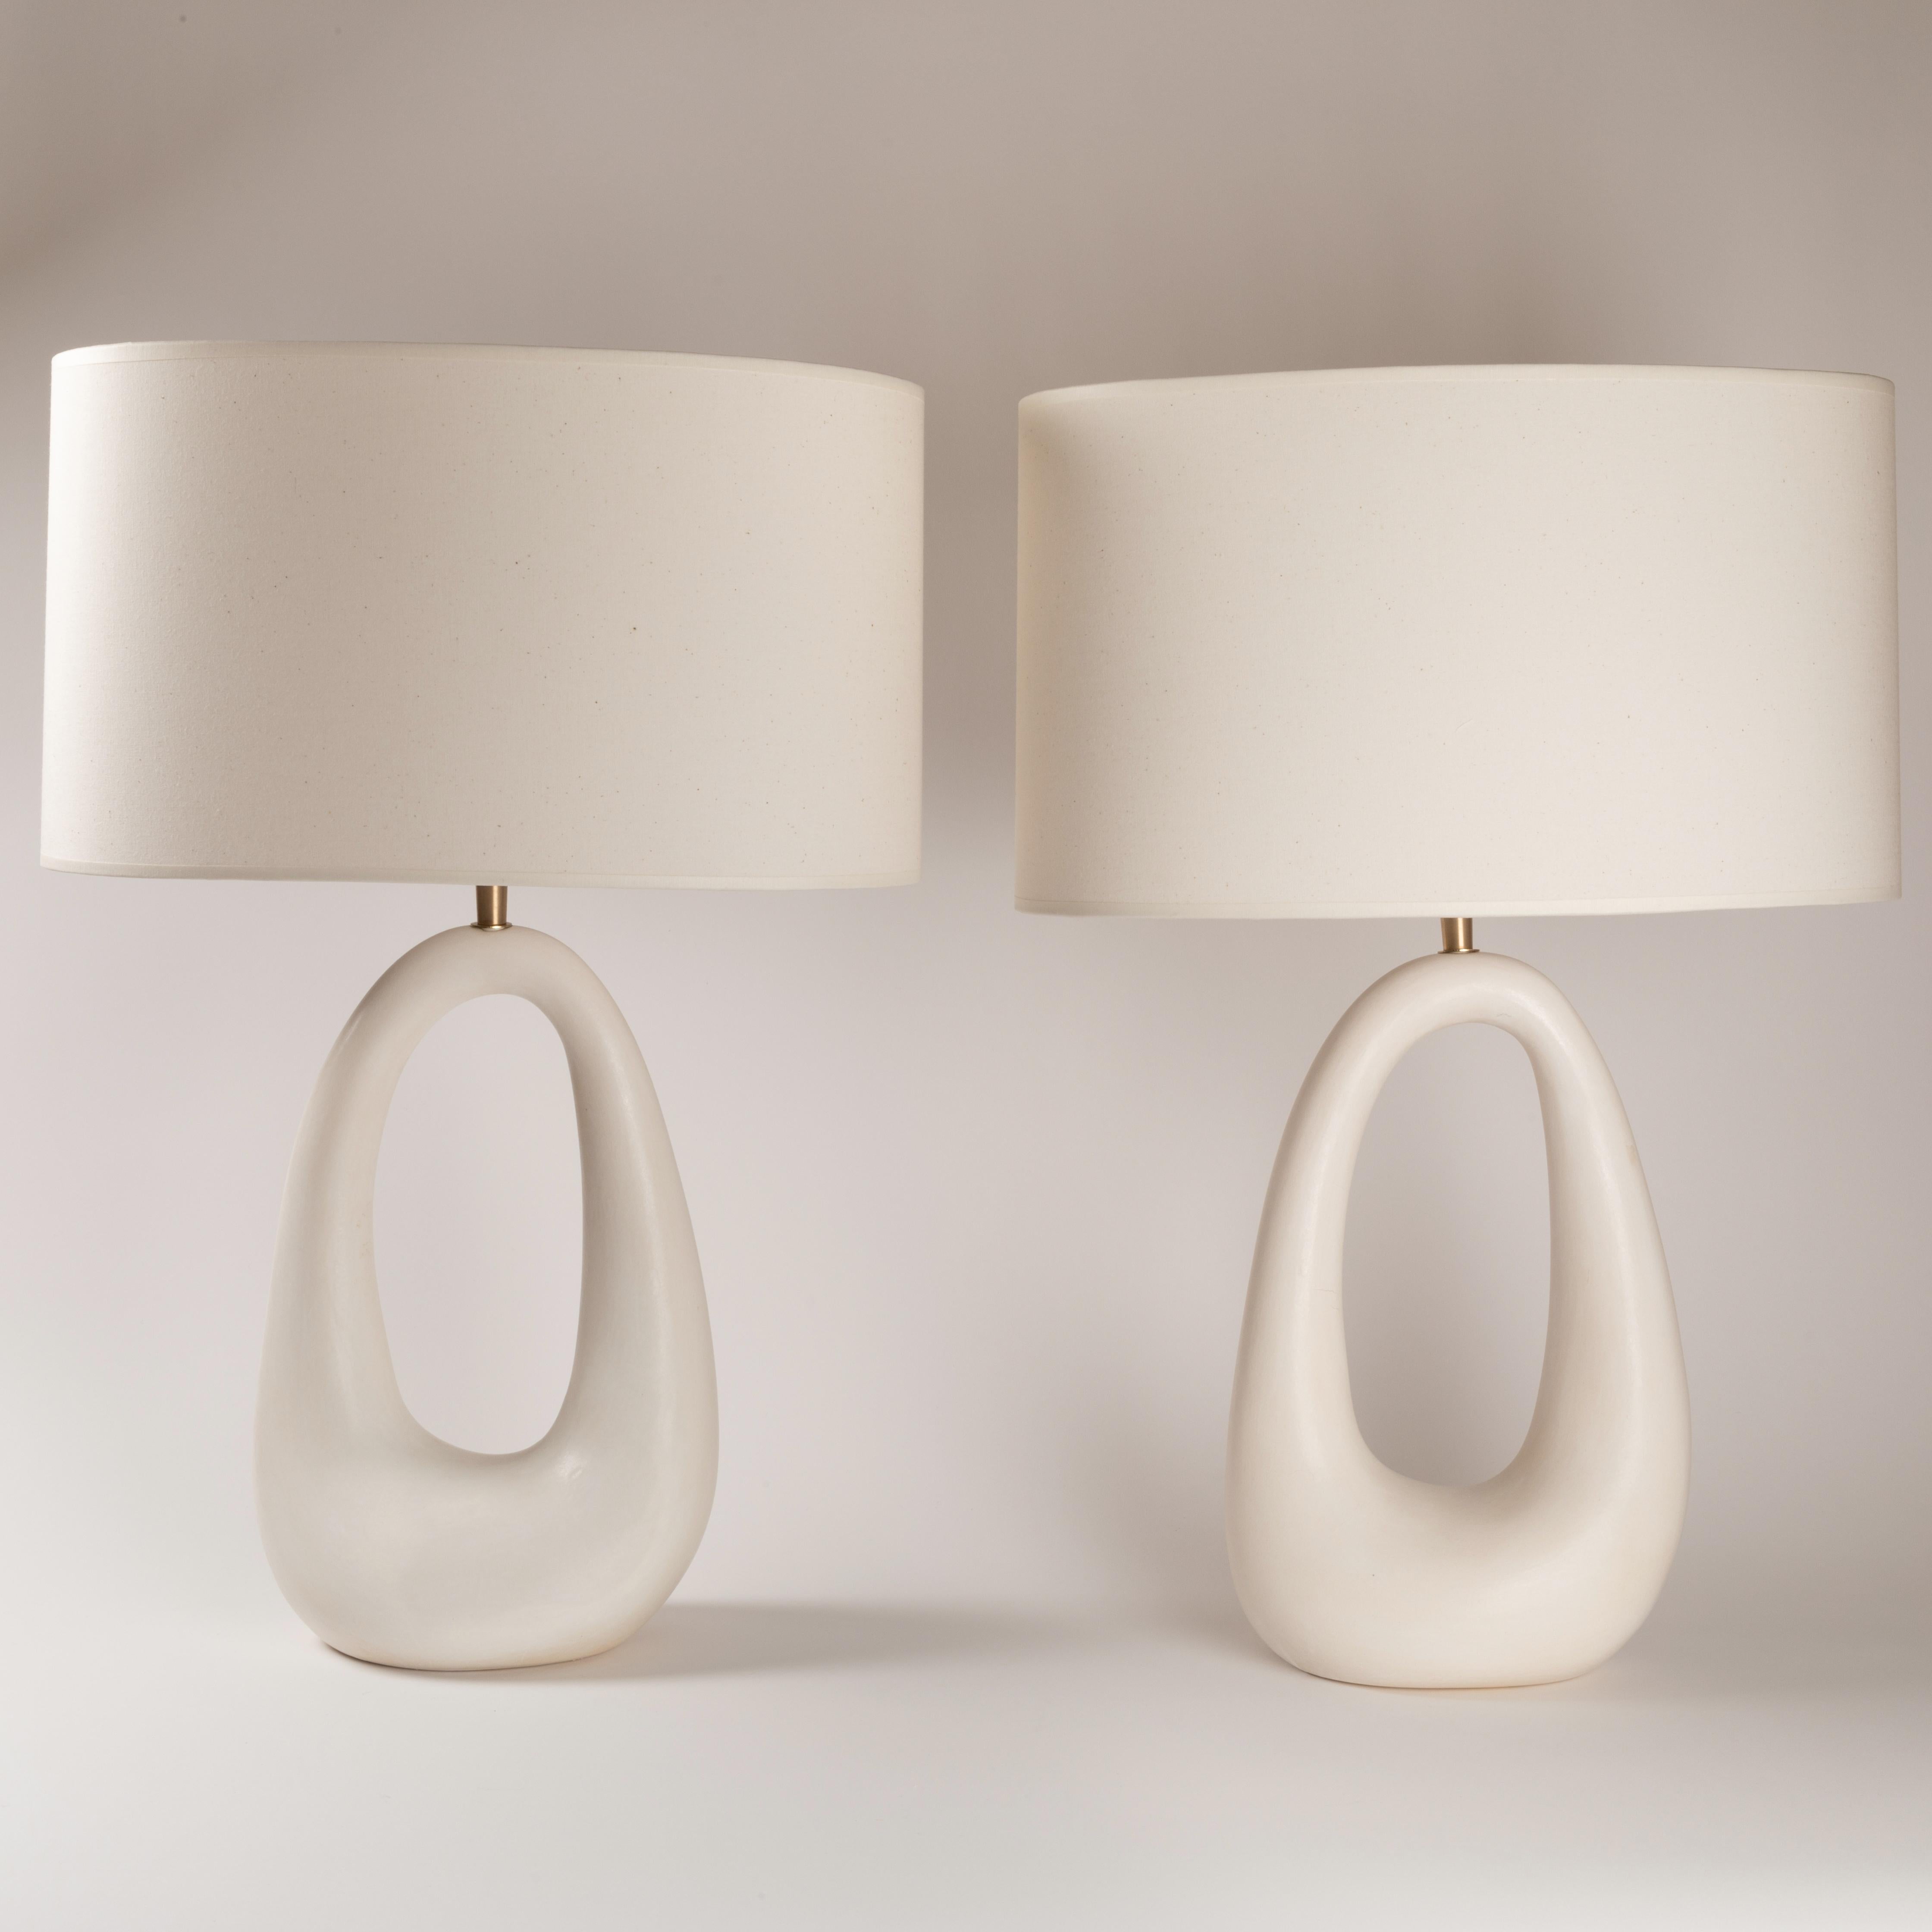 Set of 2 Hypnos Table Lamps by Elsa Foulon.
Dimensions: D 64 x H 41 cm.
Materials: ceramic, brass, linen.
-Unique piece-
Also available in different finishes and dimensions.
All our lamps can be wired according to each country. If sold to the USA,